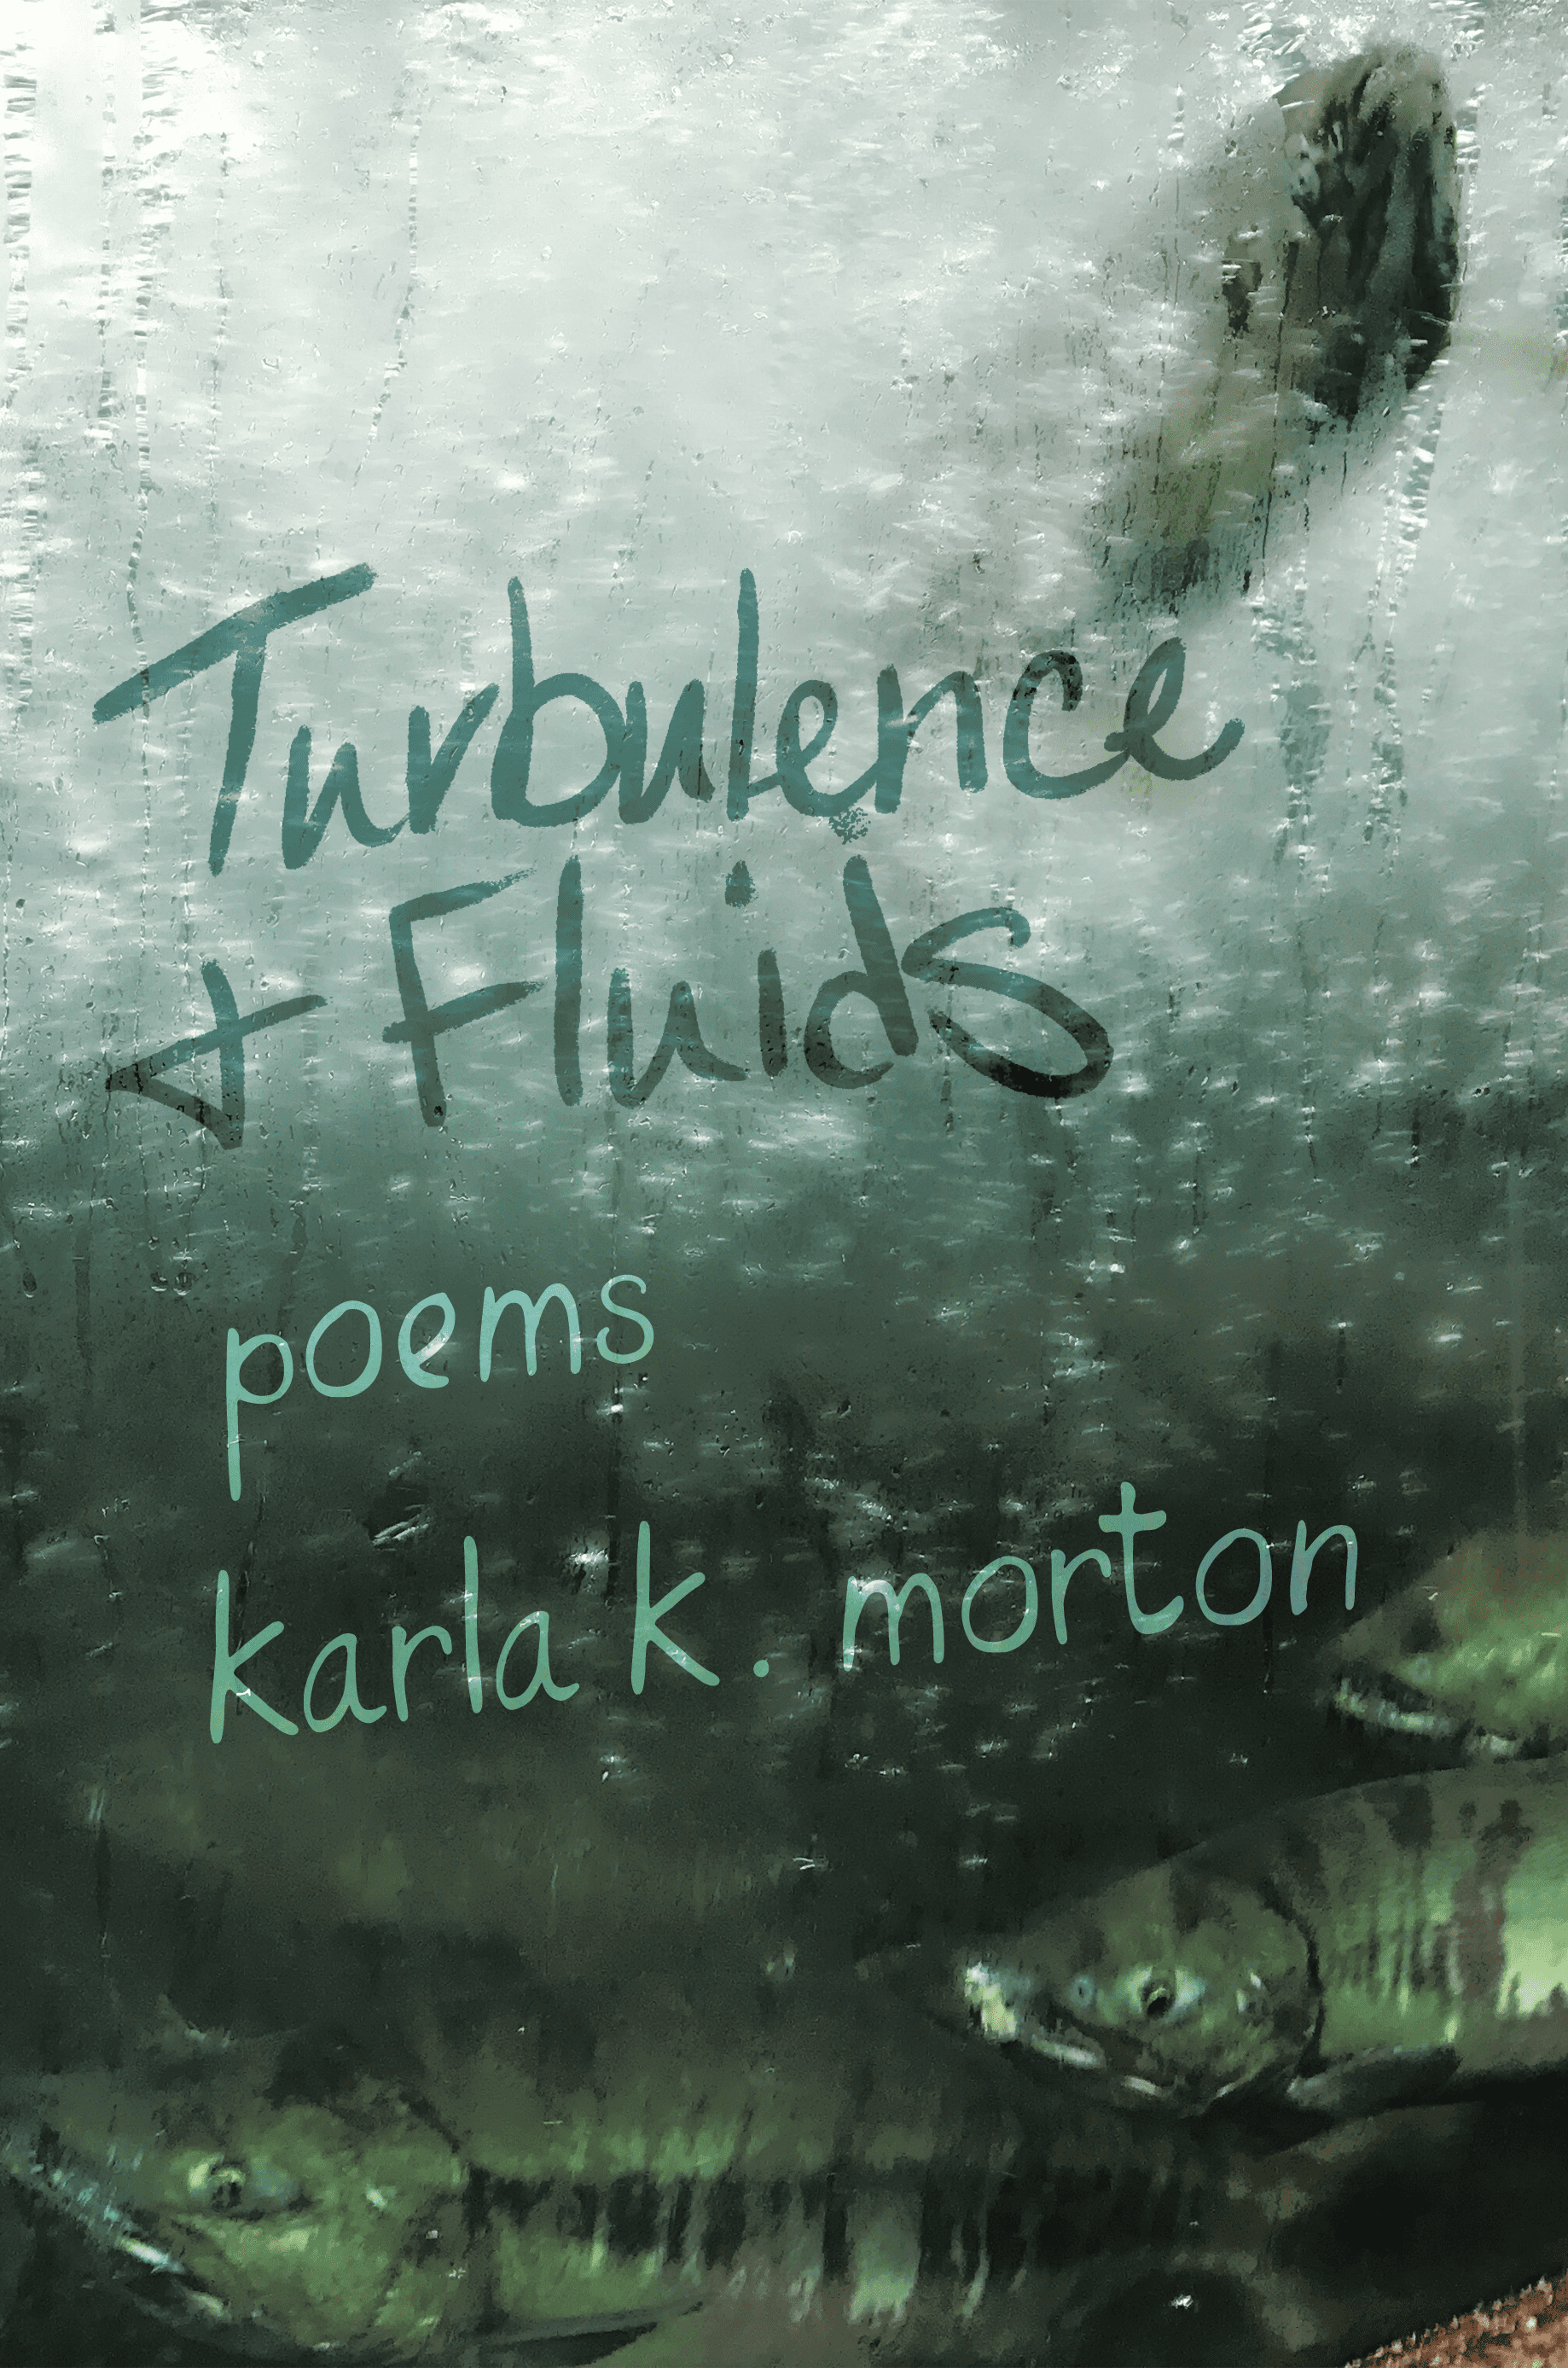 Turbulence &amp; Fluids poems by karla k. morton. image is of fish behind frosty green glass in turbulent bubble filled water. The text is written in the frost on the glass.